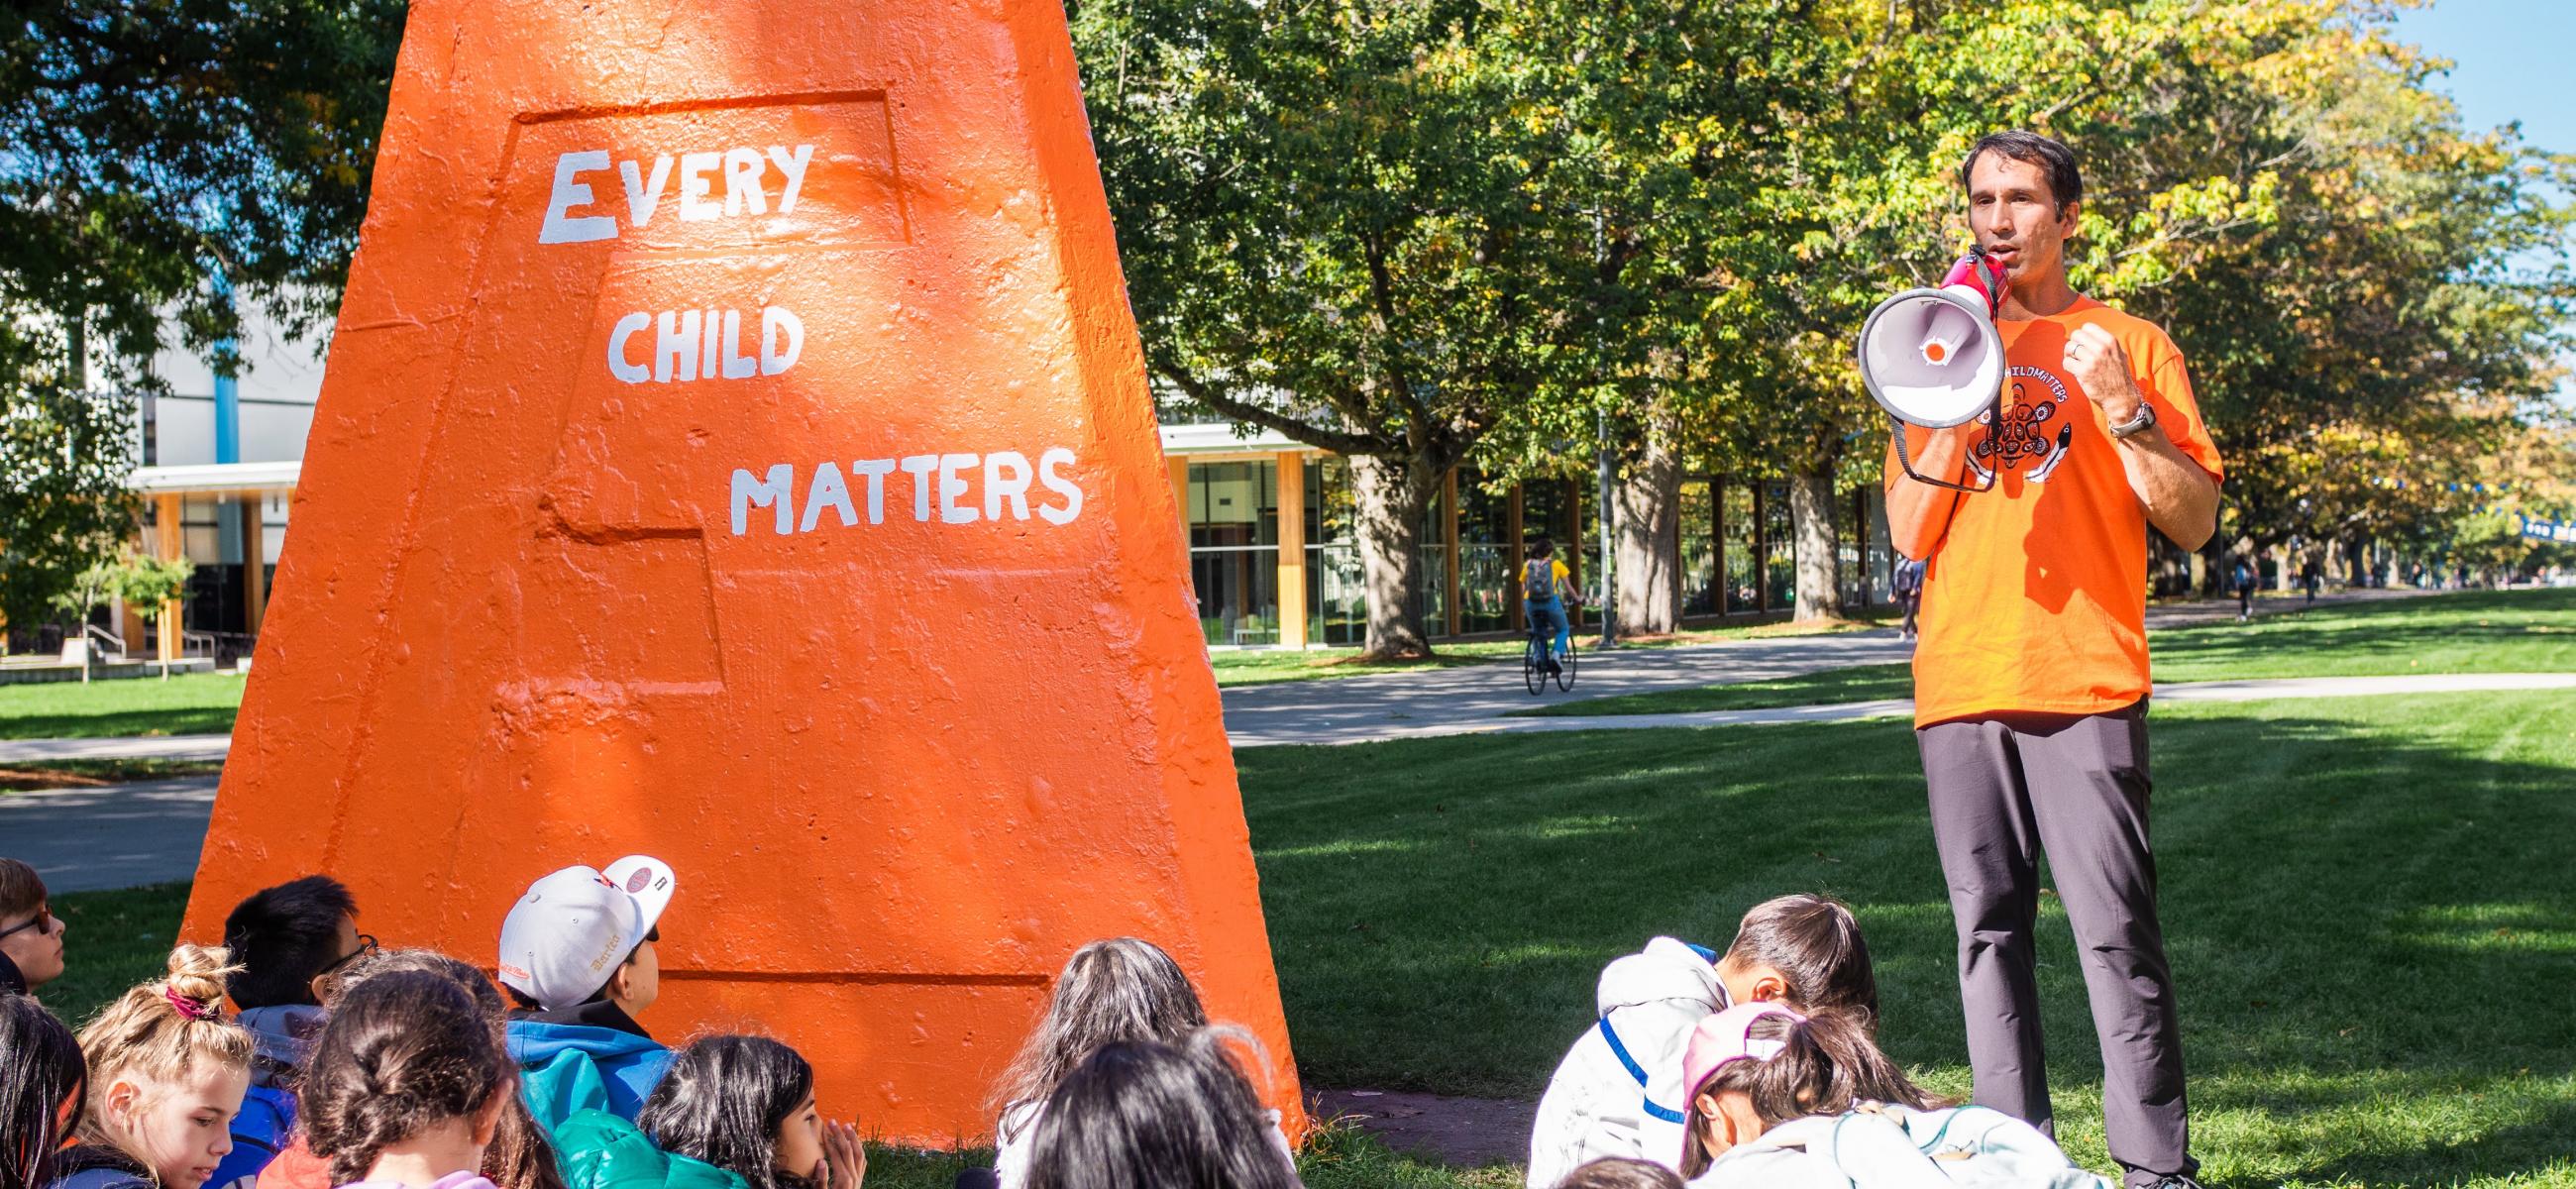 Danilo Caron in an orange shirt, speaking next to the UBC Engineering Cairn painted orange with "Every Child Matters" on it.